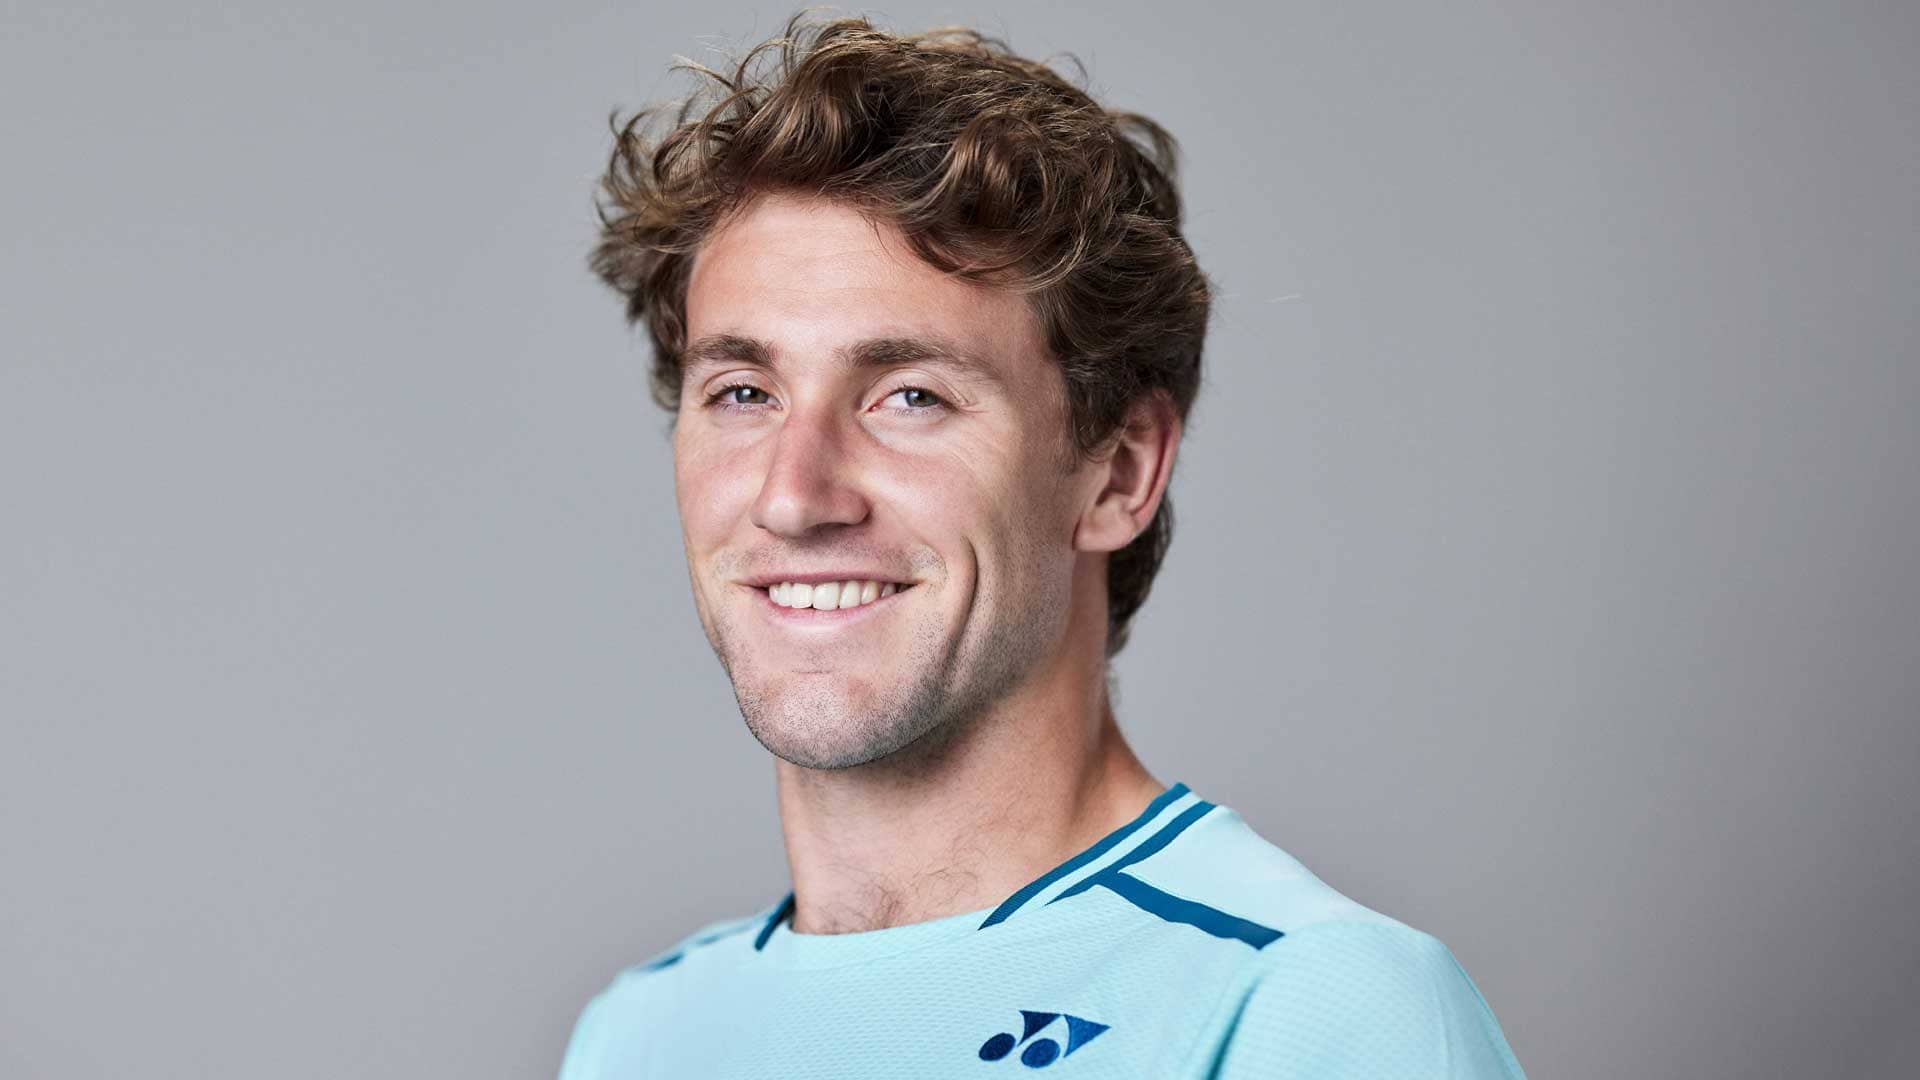 Casper Ruud has climbed as high as No. 2 in the PIF ATP Rankings.